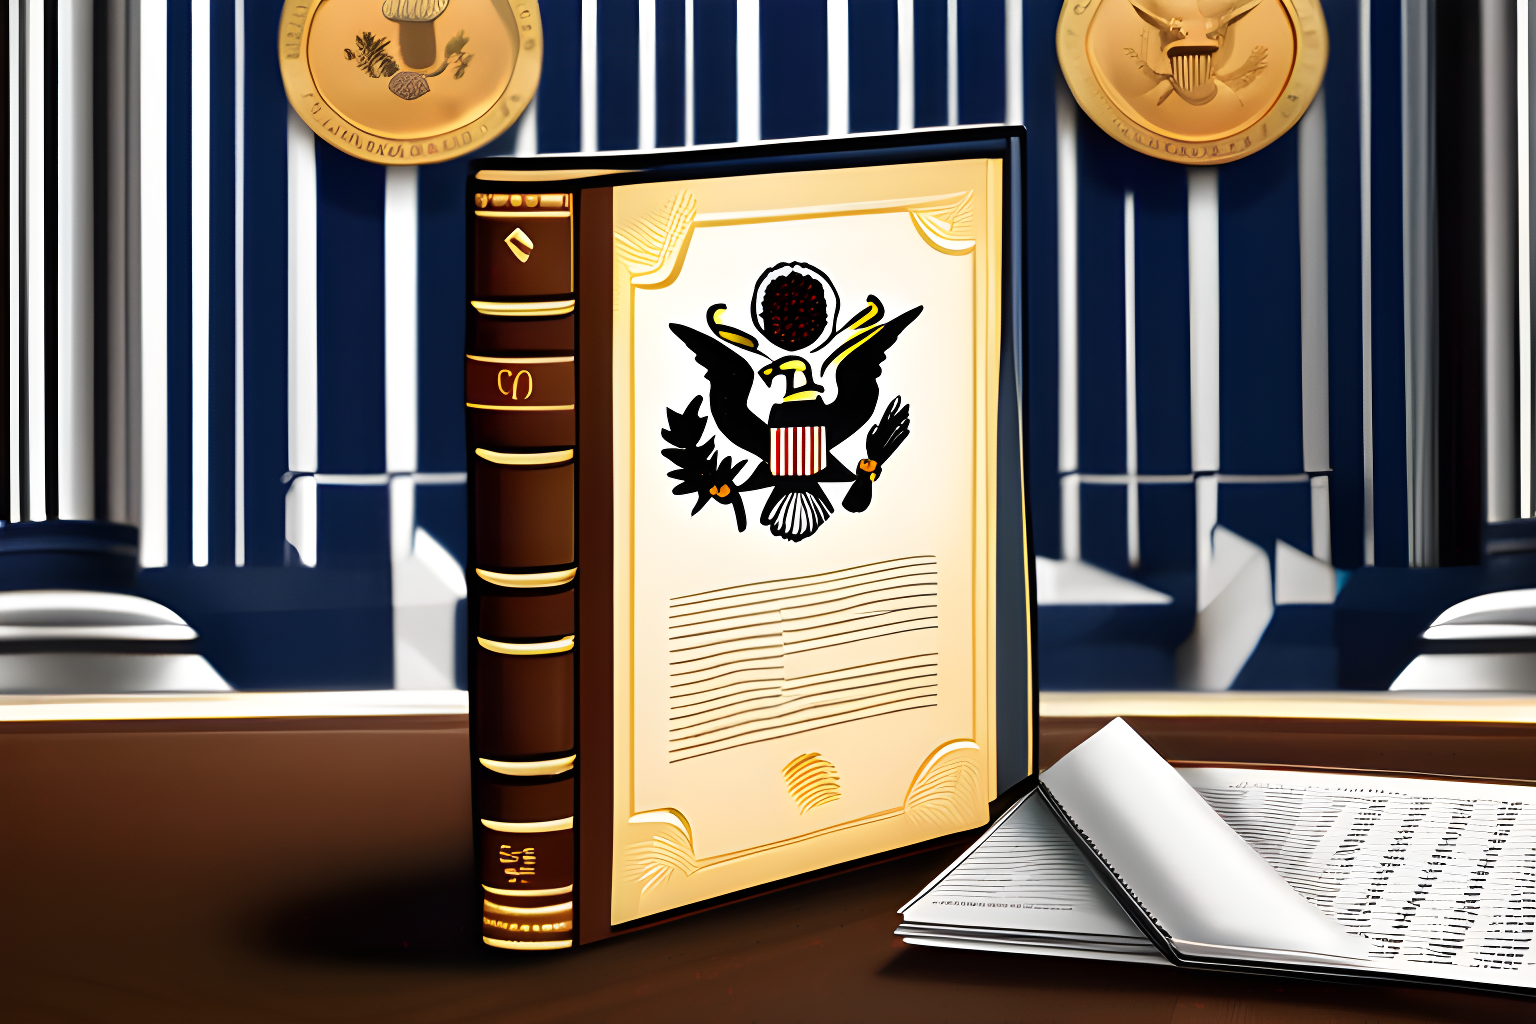 Illustrate a leather-bound document with the U.S SEC's crest plastered on it